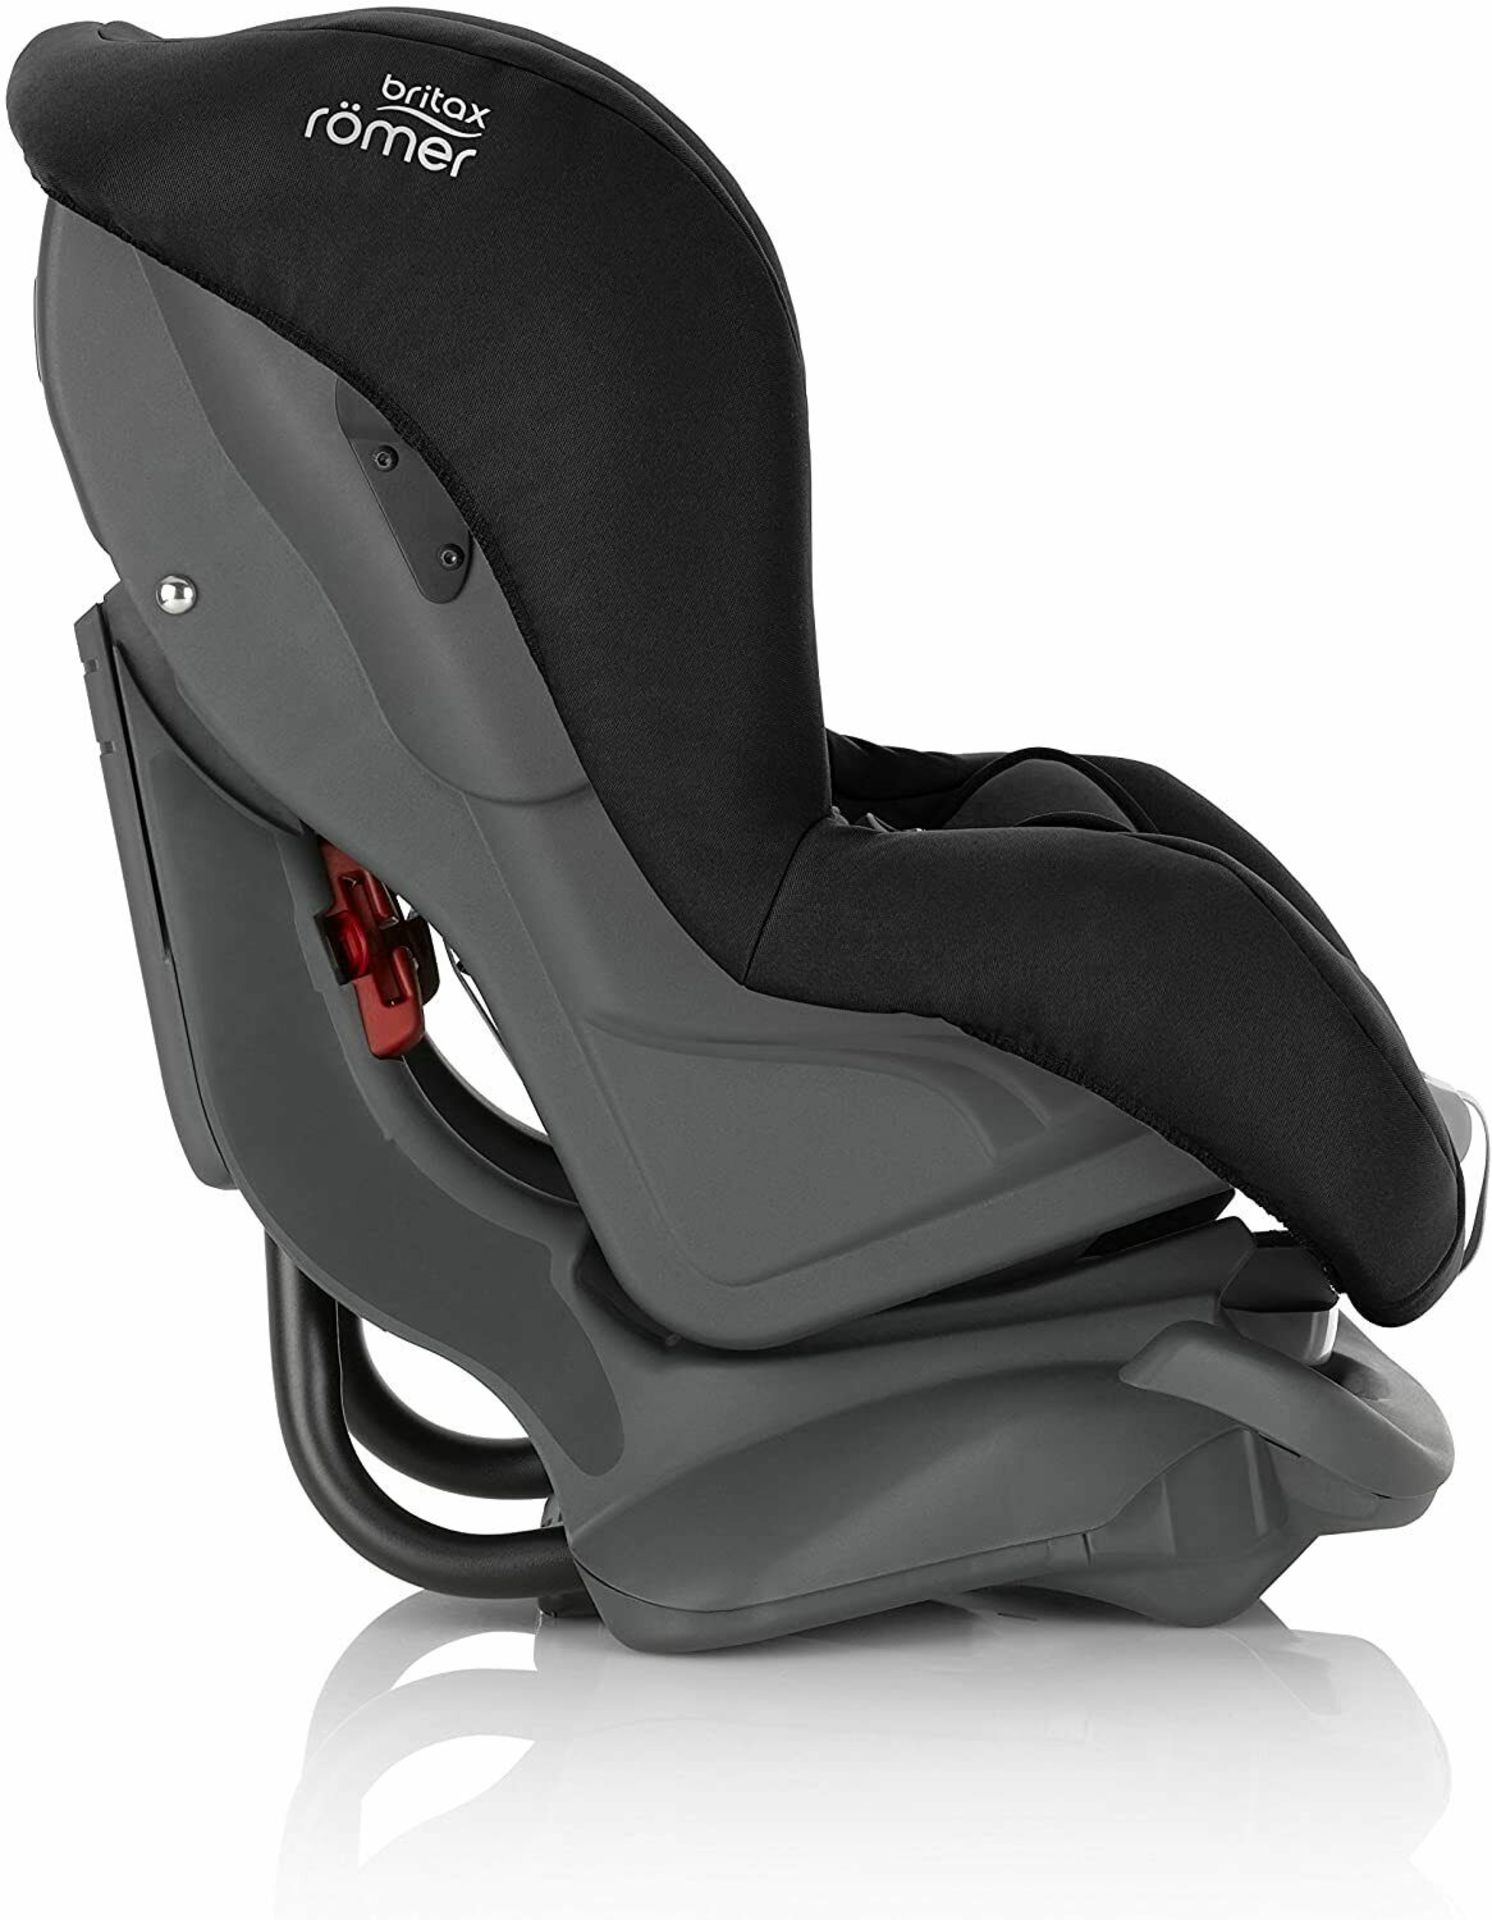 new britax römer first class plus br cosmos black car seat rrp £199 - Image 2 of 4